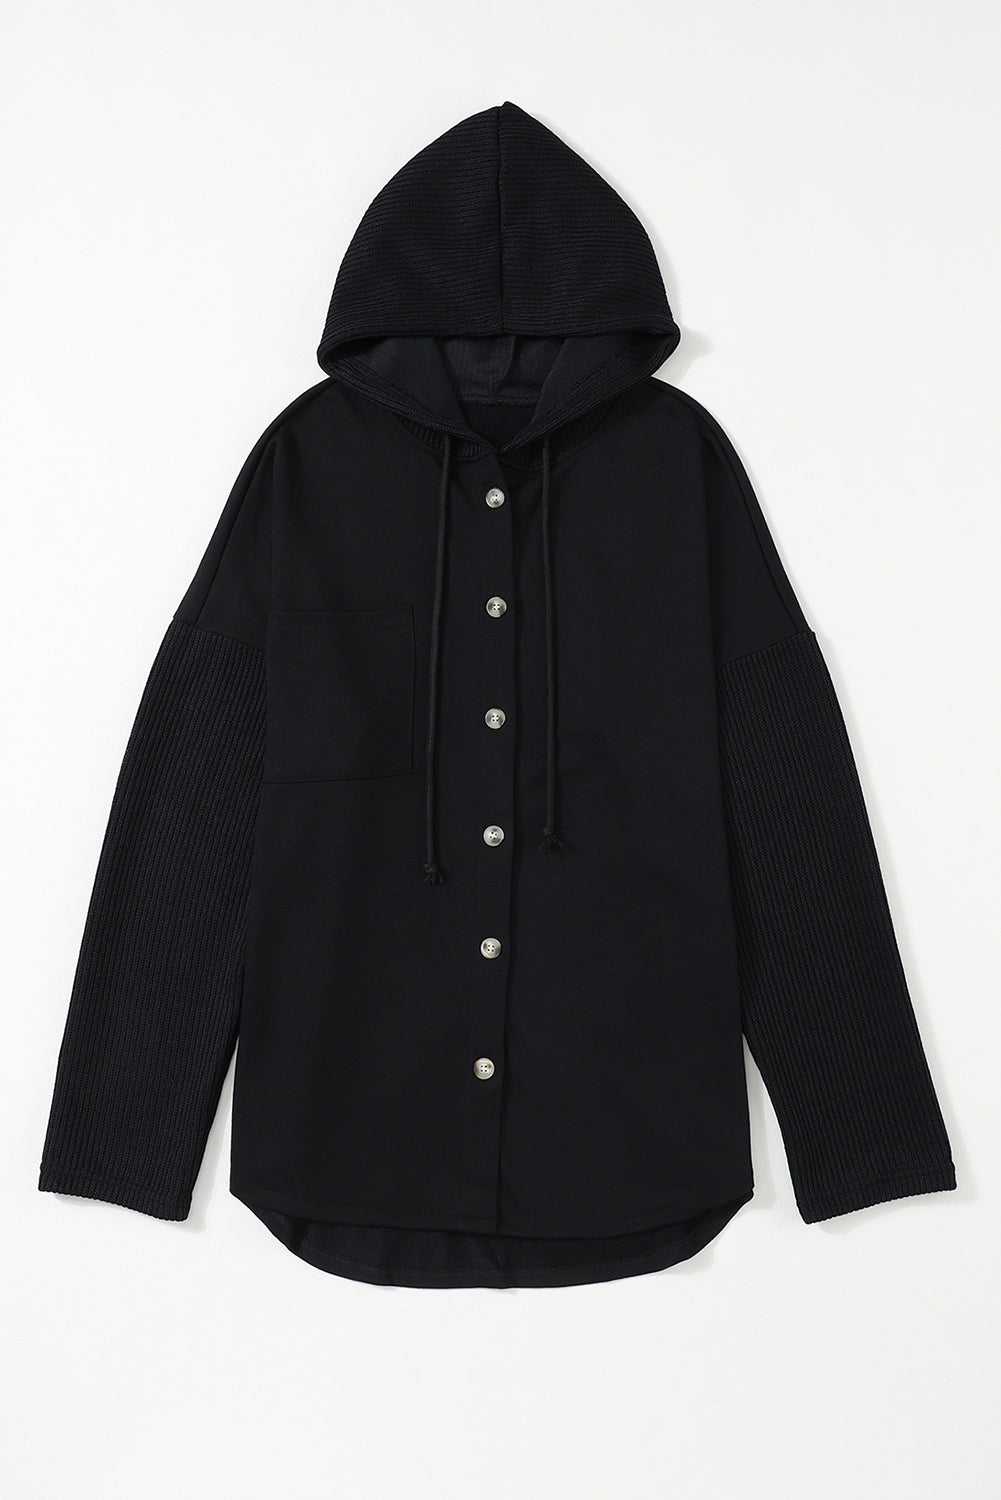 Emerson Knitted Sleeves Hooded Jacket